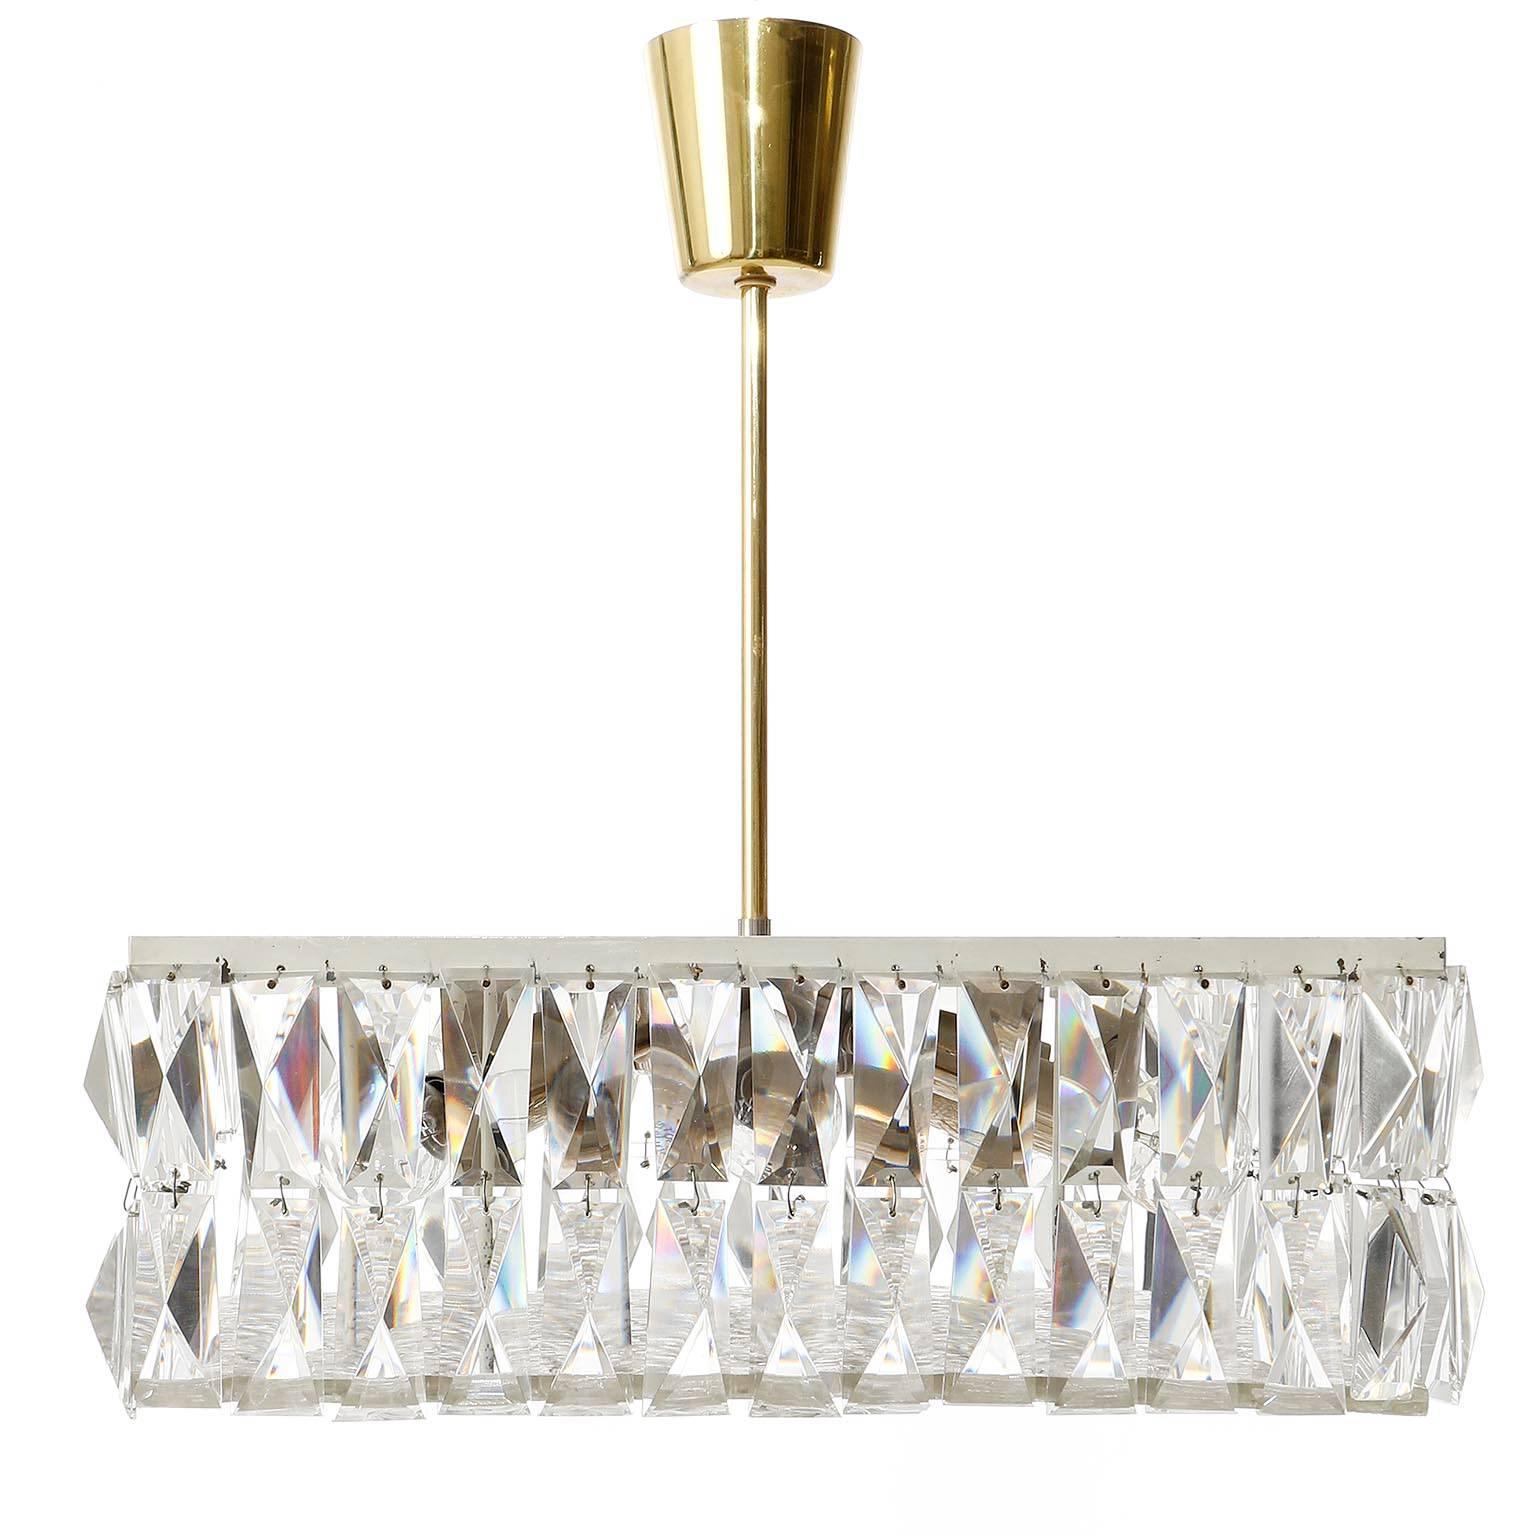 Square Kalmar Light Fixture, Textured and Crystal Glass, 1960s, One of Two (Österreichisch)